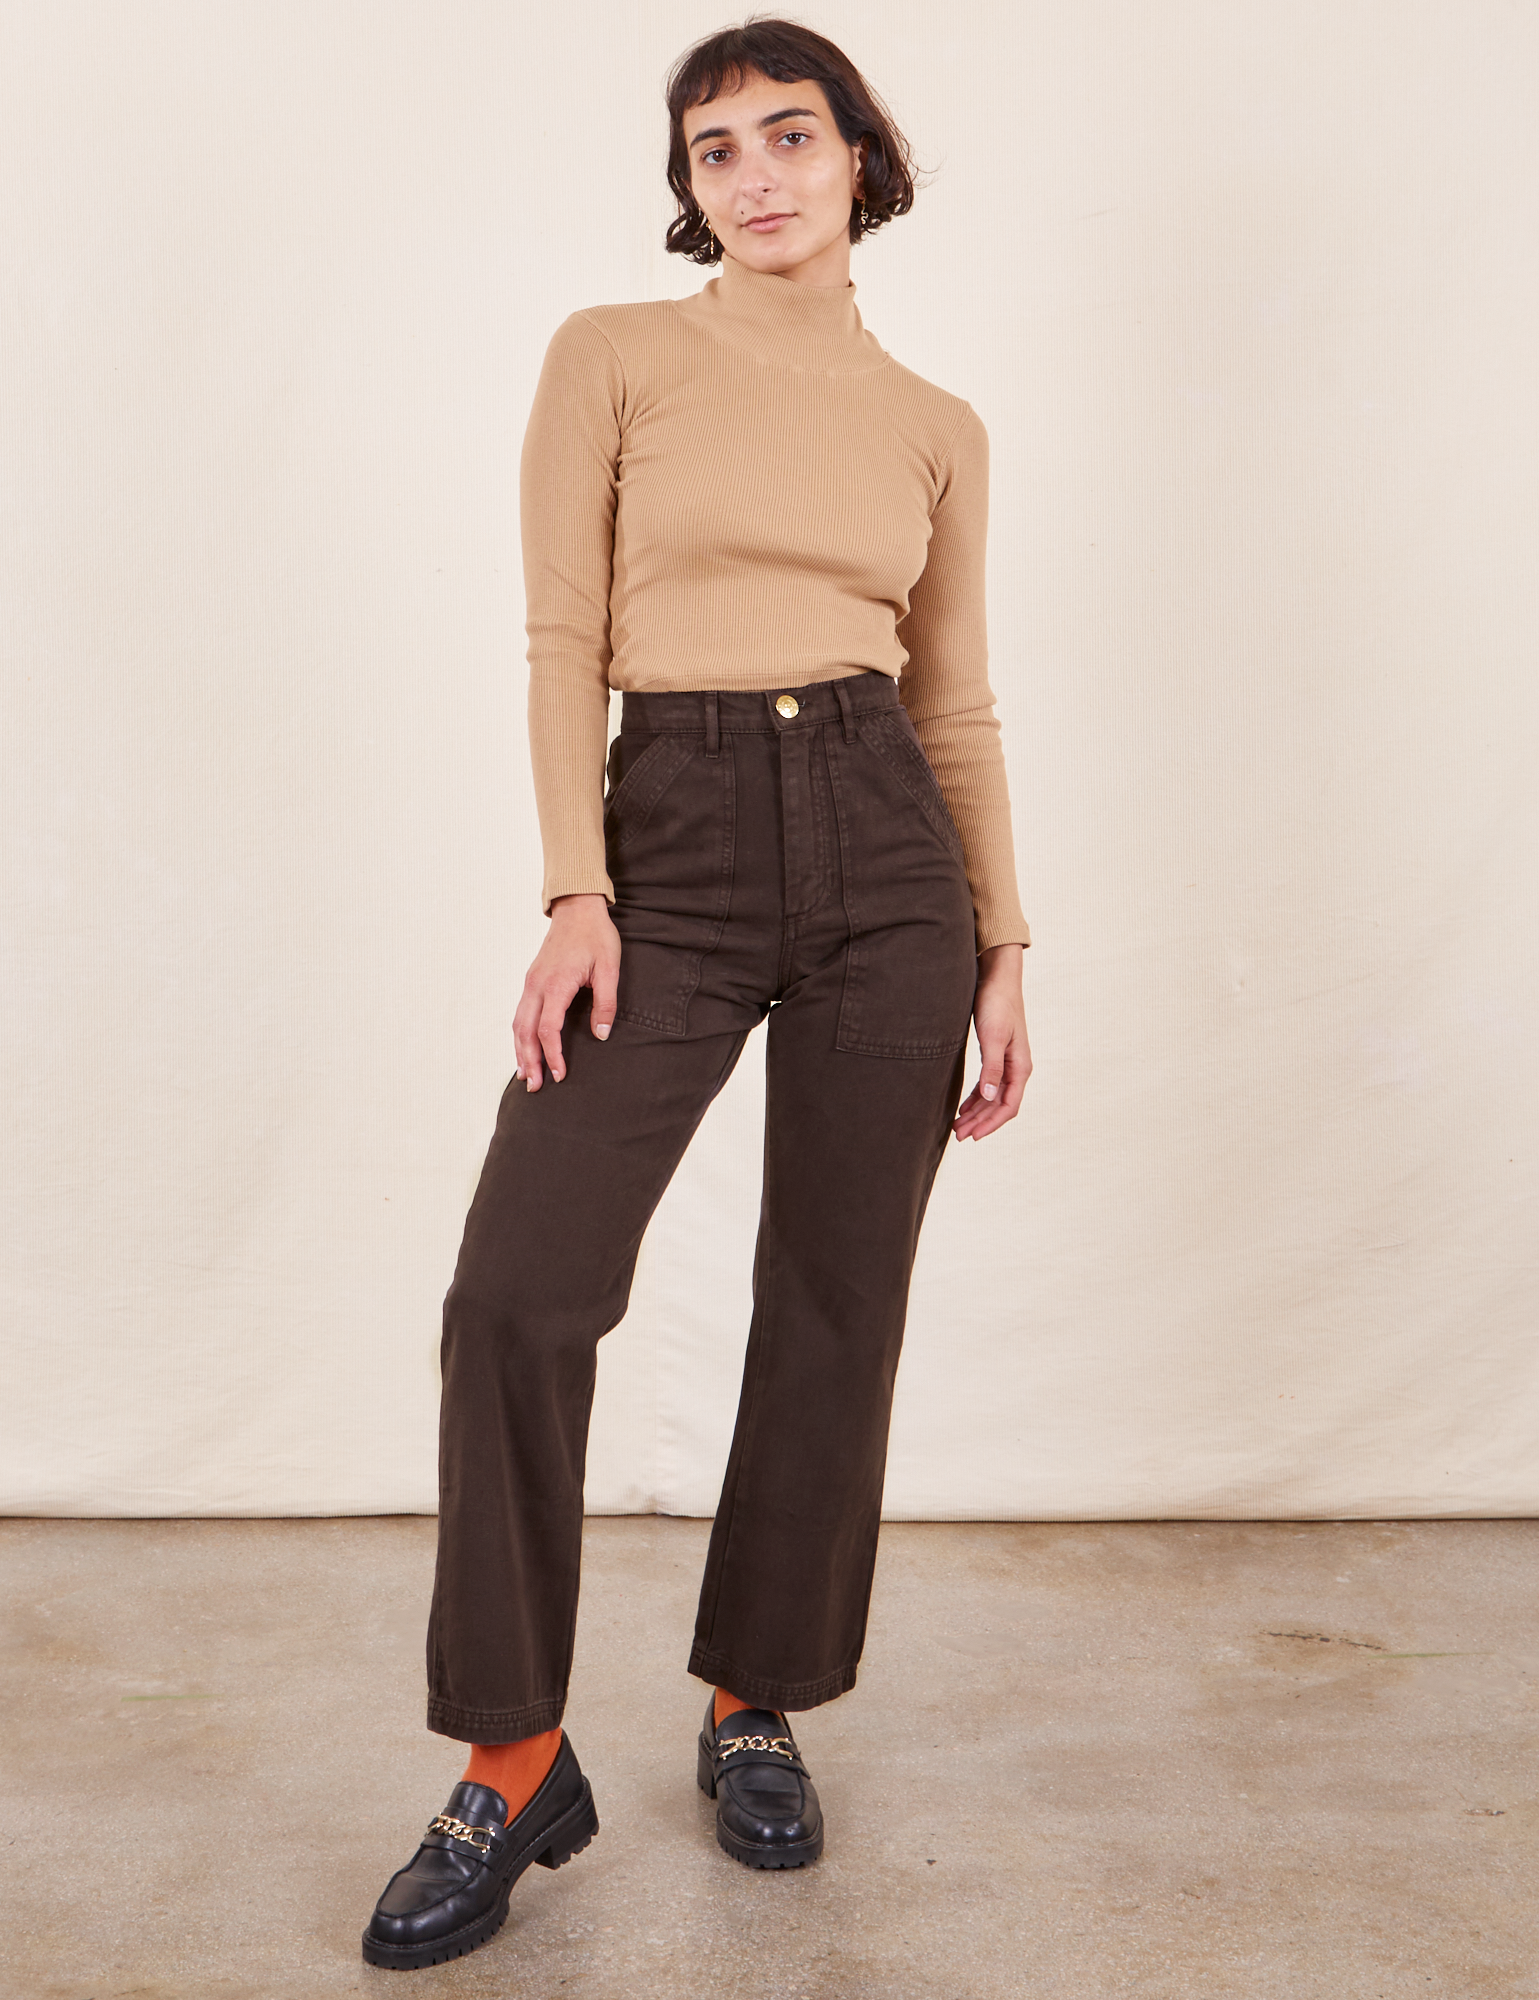 Soraya is 5&#39;2&quot; and wearing Petite XXS Work Pants in Espresso Brown paired with Essential Turtleneck in Tan